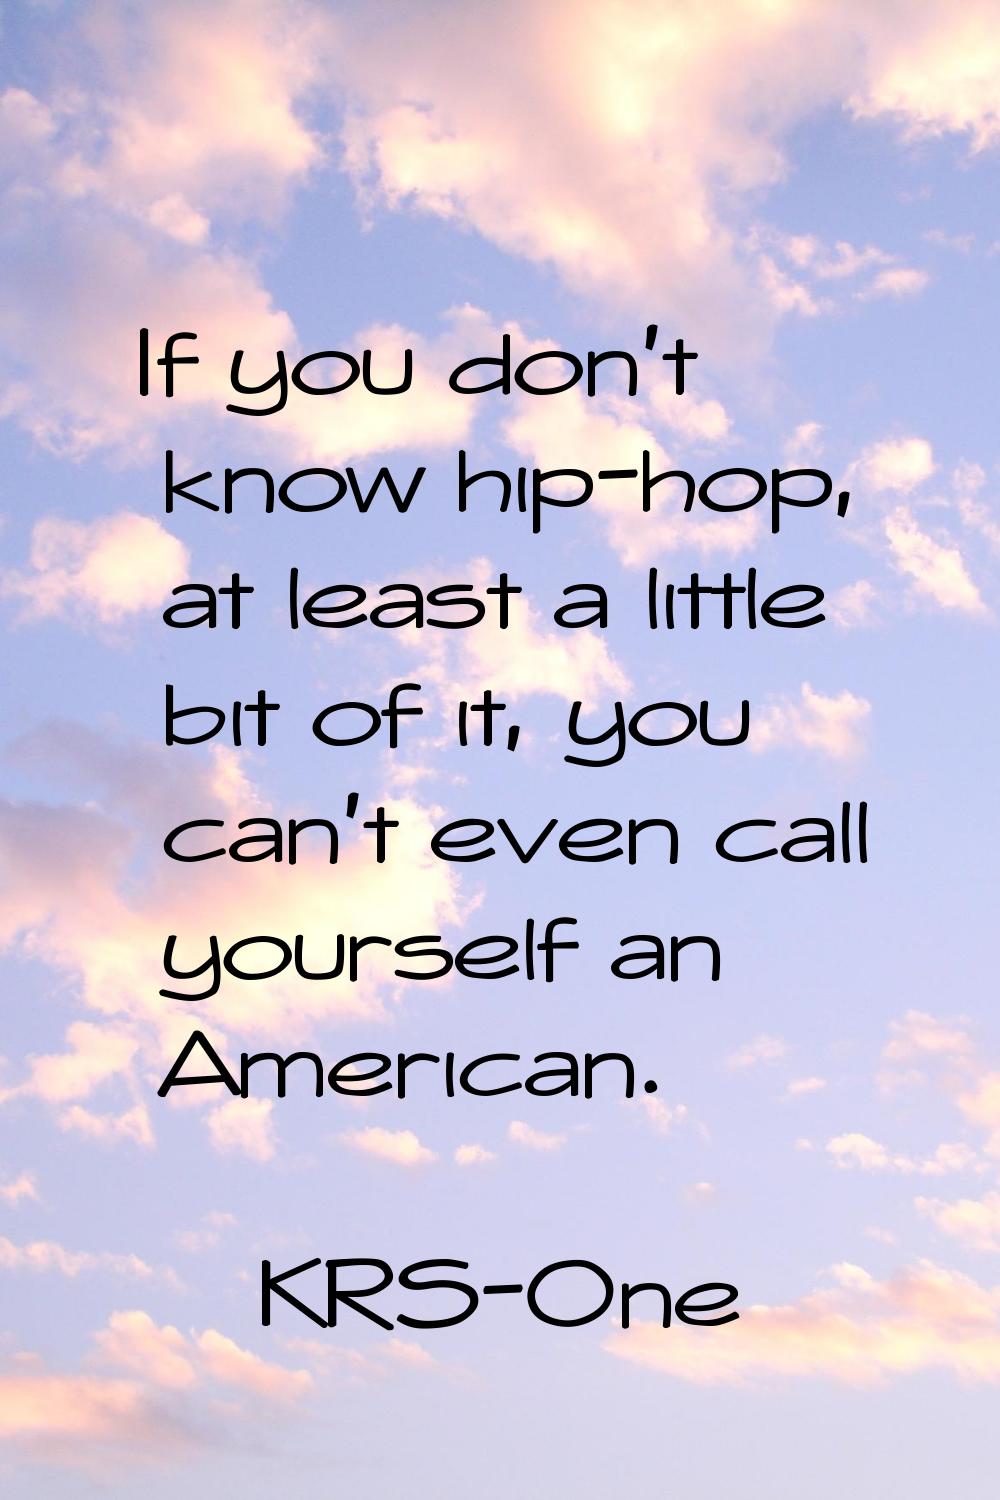 If you don't know hip-hop, at least a little bit of it, you can't even call yourself an American.